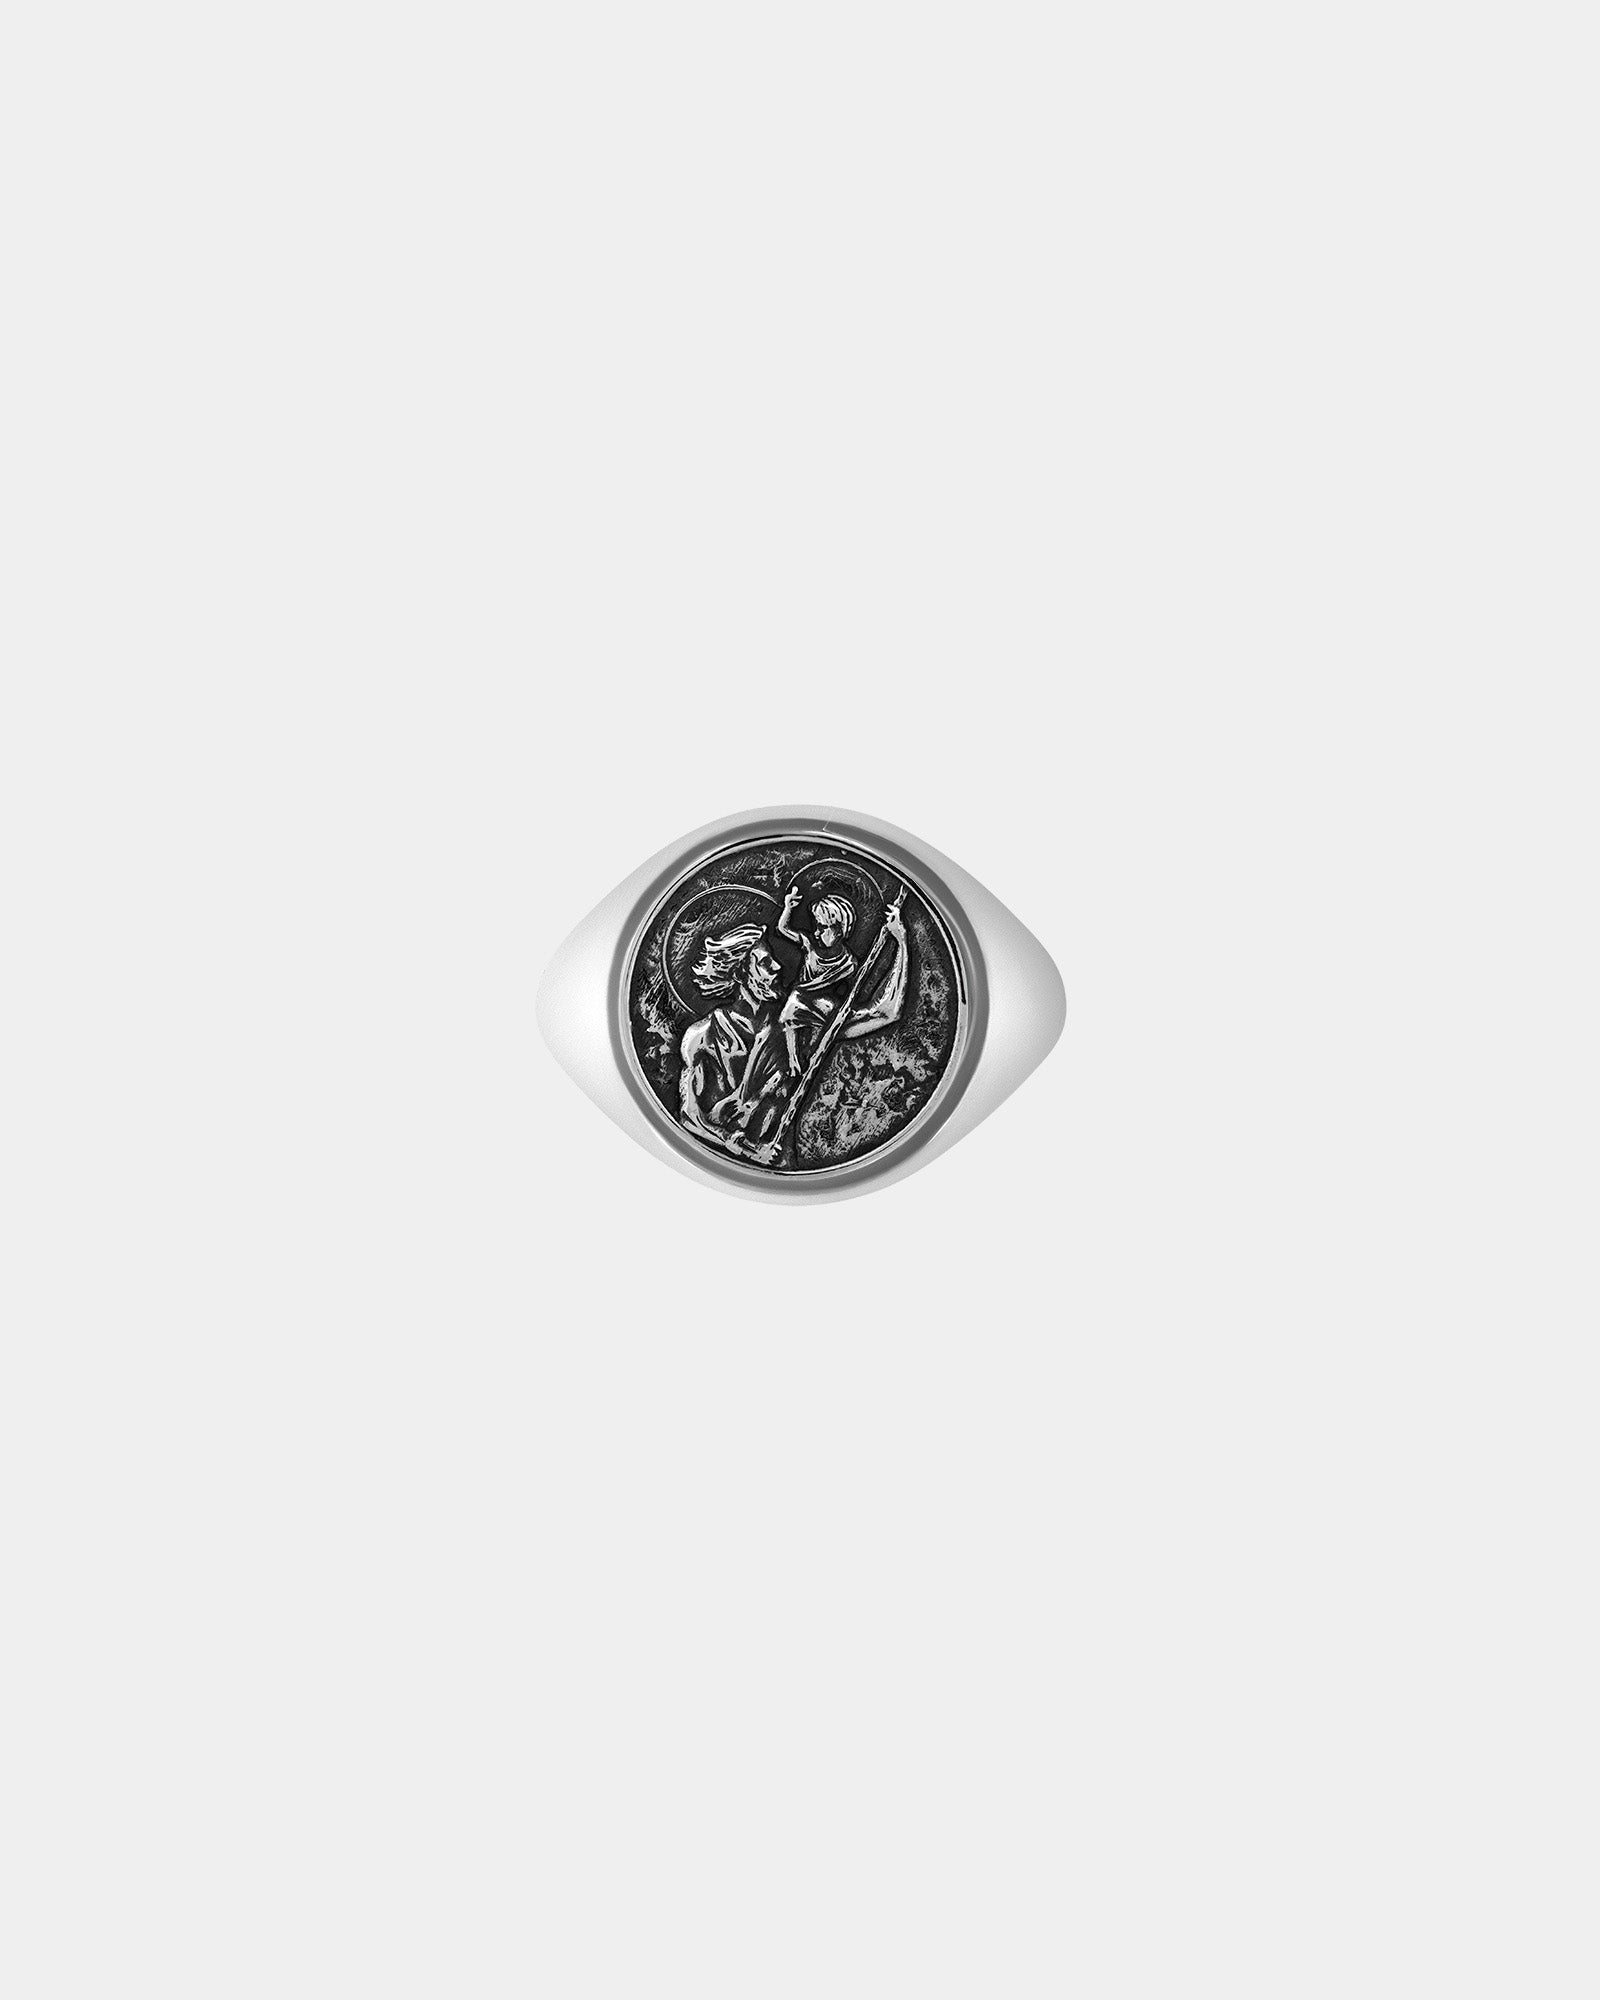 Large Saint Christopher Signet Ring in Sterling Silver by Wilson Grant